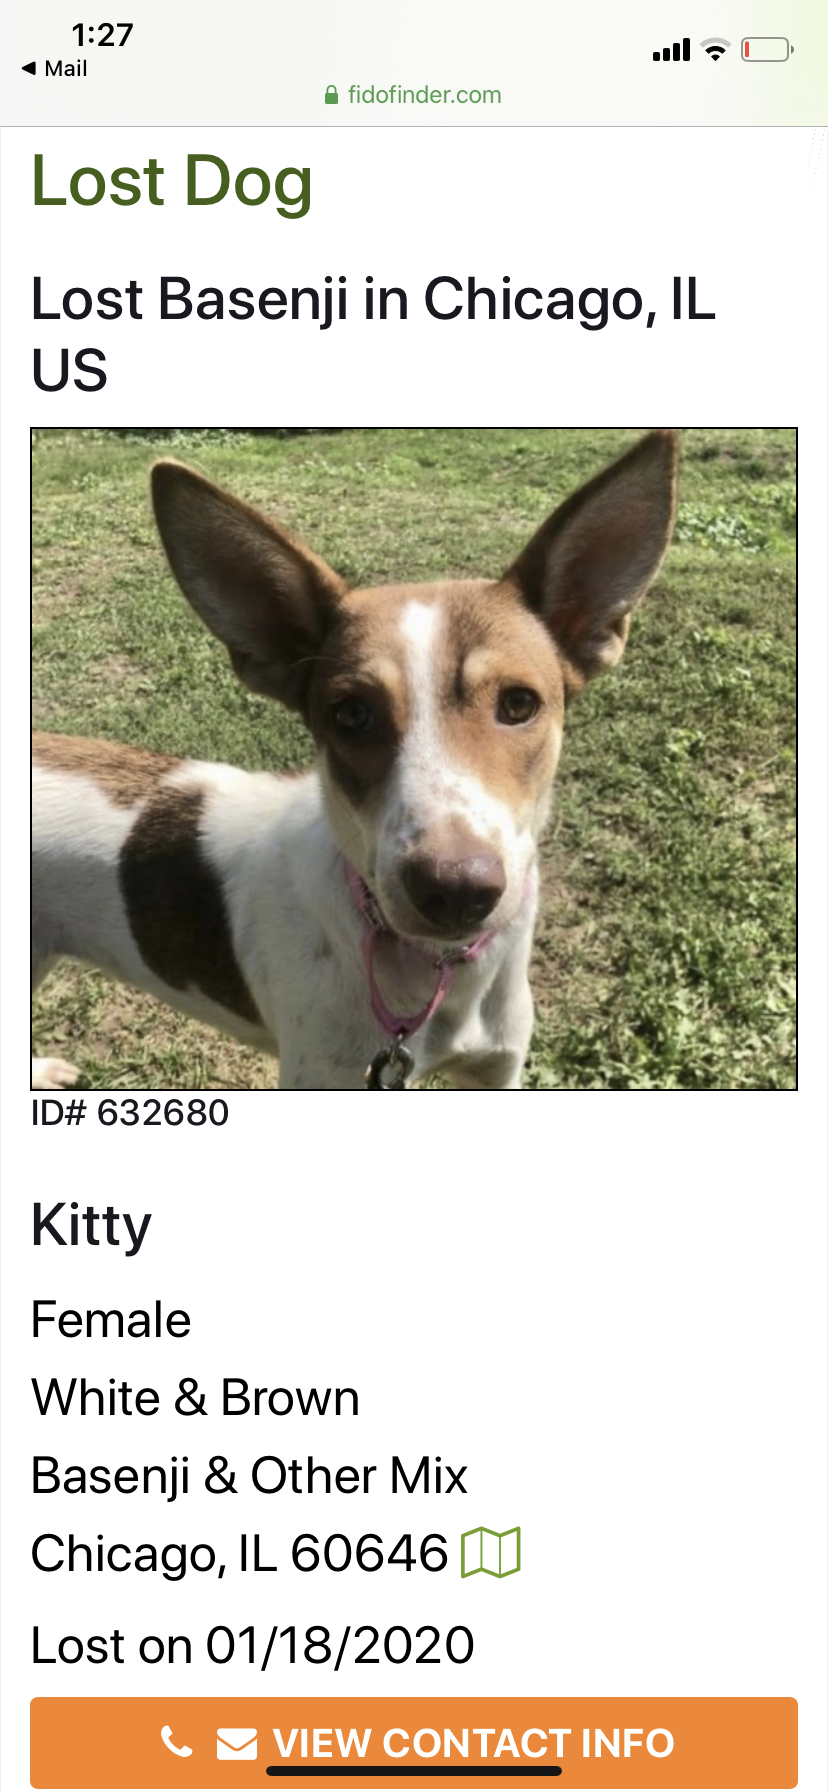 Image of Kitty, Lost Dog